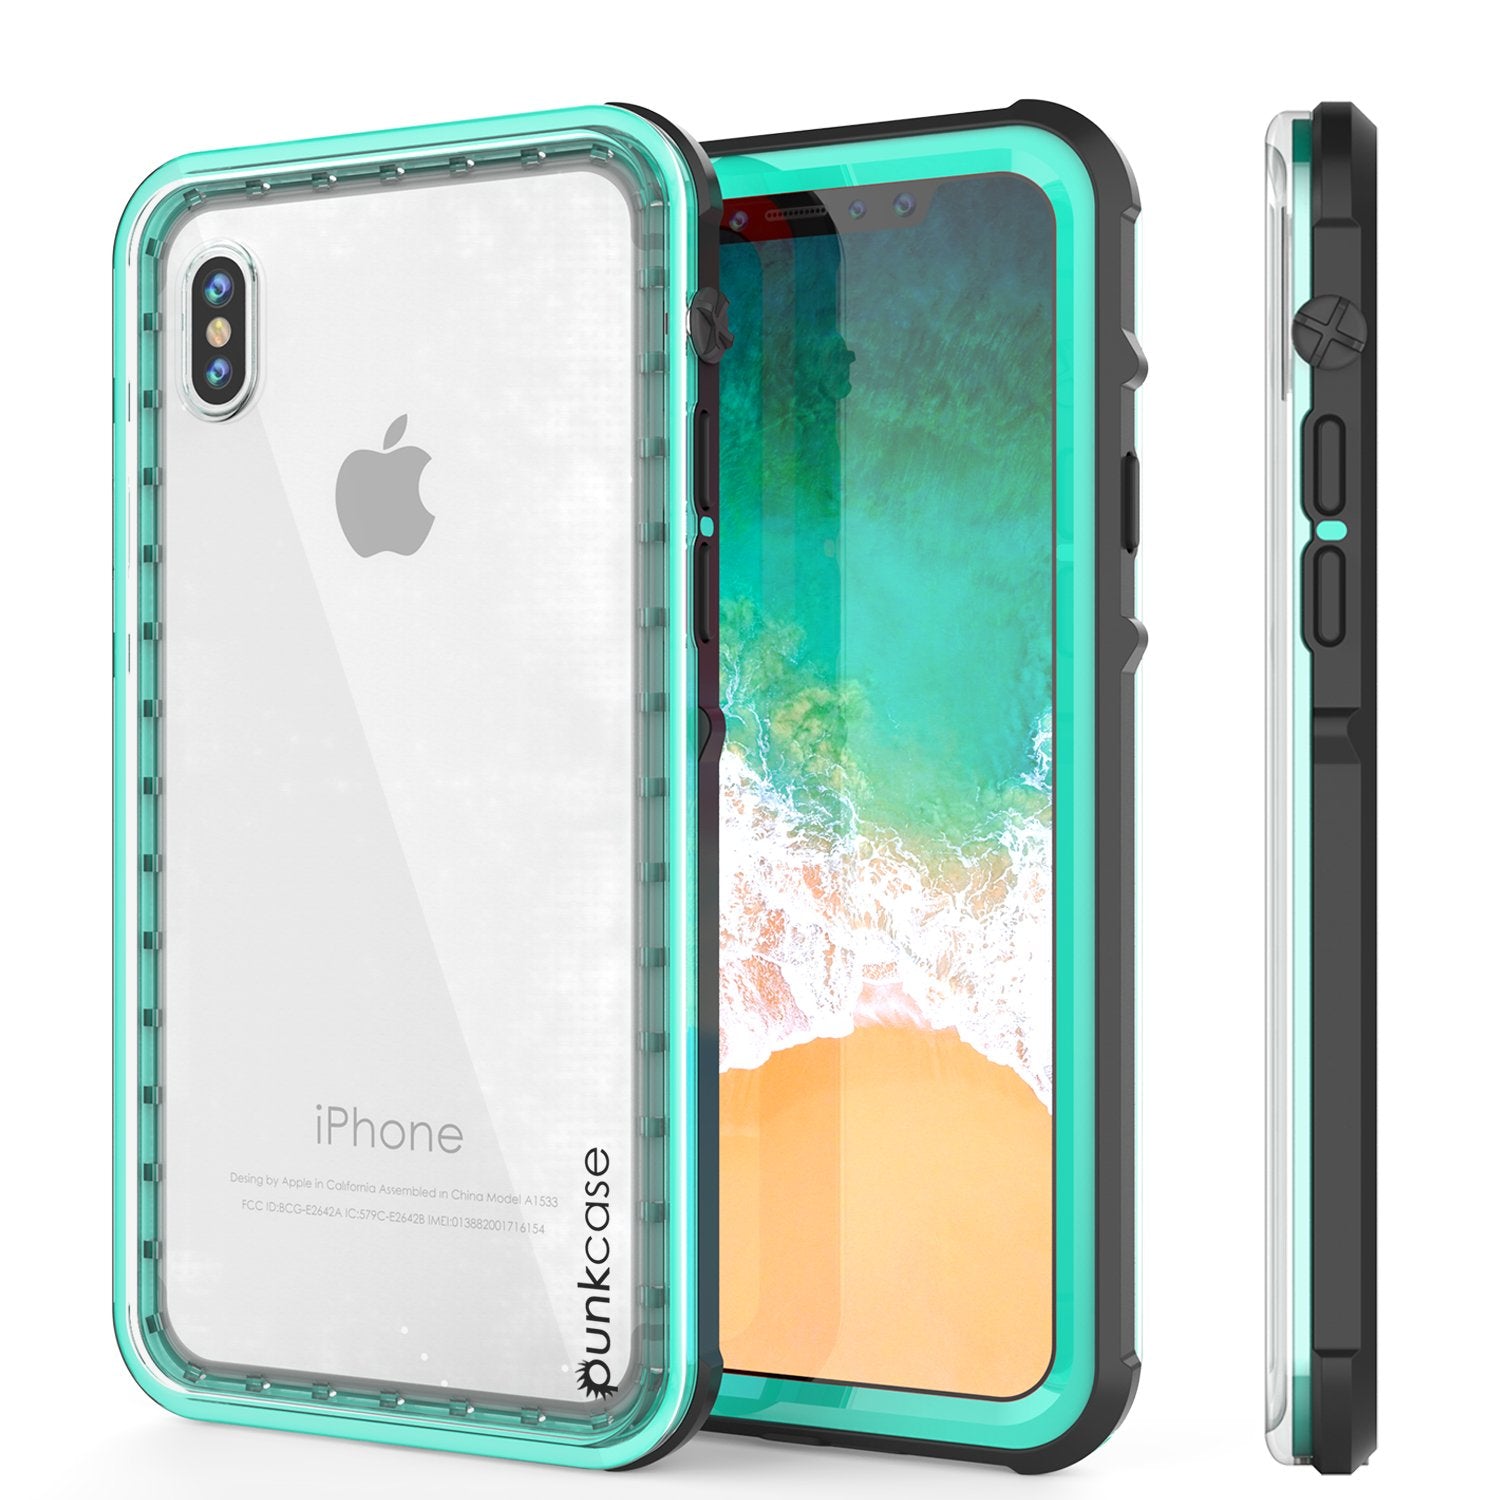 iPhone X Case, PUNKCase [CRYSTAL SERIES] Protective IP68 Certified, Ultra Slim Fit [TEAL]